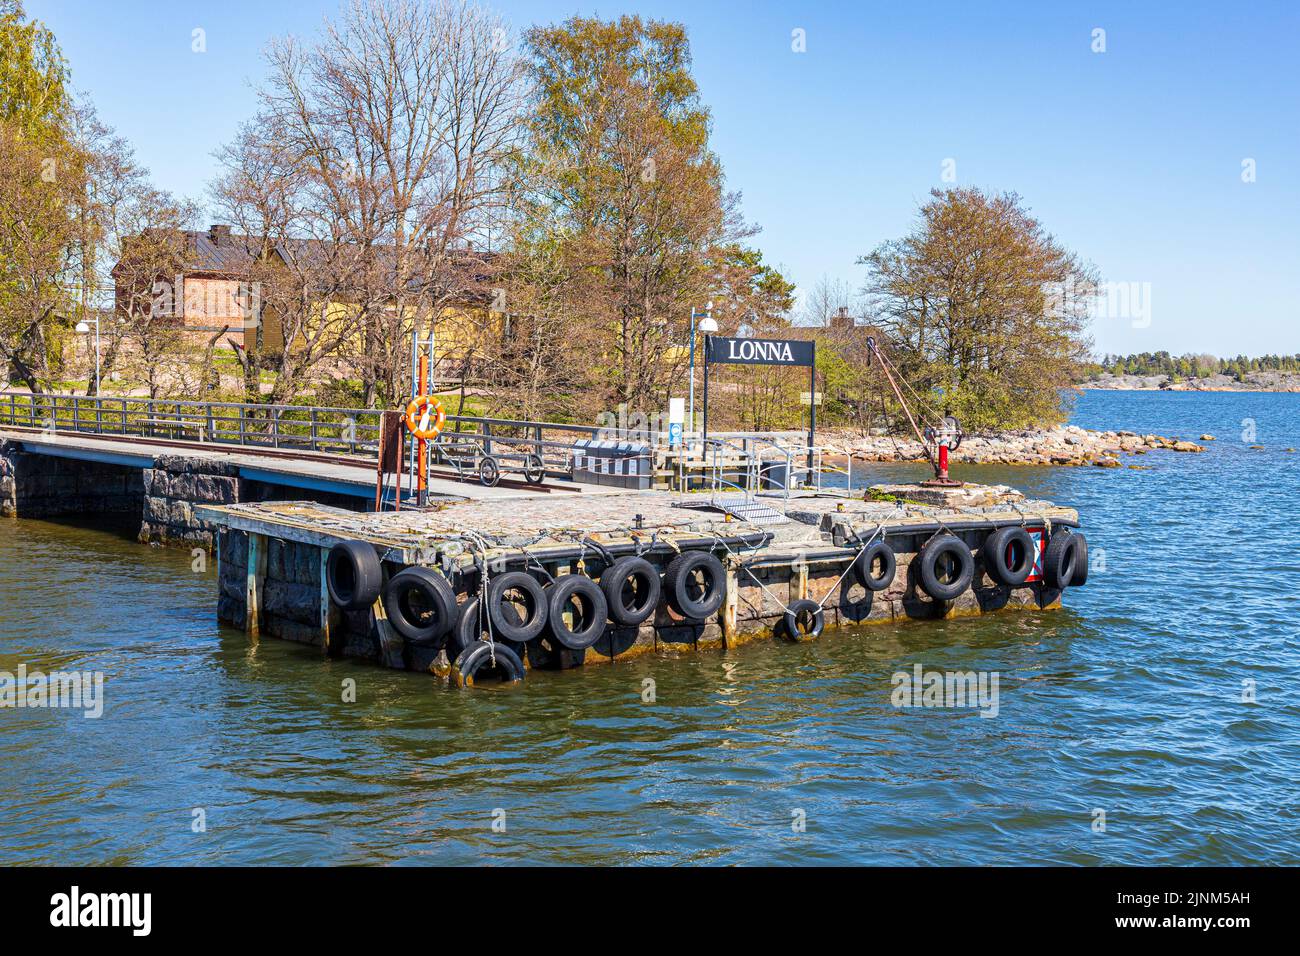 The landing jetty for the island of Lonna off Helsinki, Finland Stock Photo